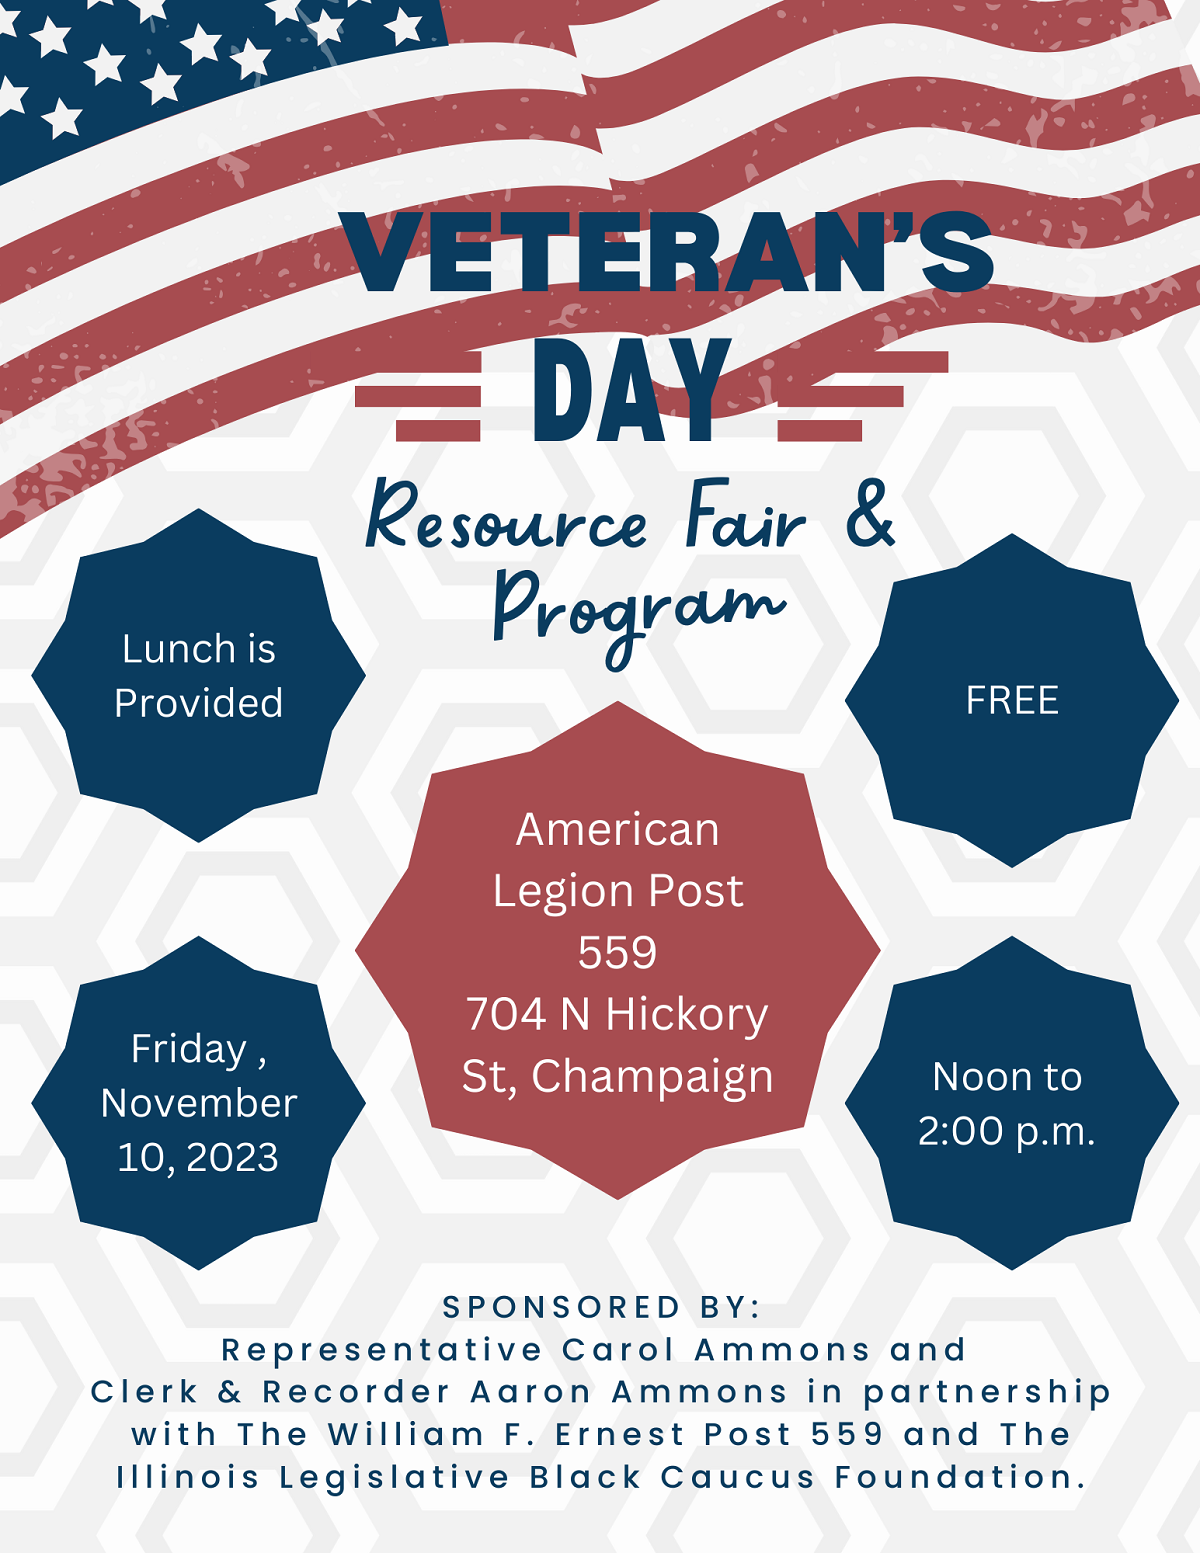 Veteran's Day Resource Fair and Program. Friday, November 10, 2023. Noon to 2 p.m. American Legion Post 559, 704 N. Hickory St., Champaign. Free. Lunch is provided. Sponsored by Representative Carol Ammons and Clerk and Recorder Aaron Ammons in partnership with the William F. Ernest Post 559 and the Illinois Legislative Black Caucus Foundation.